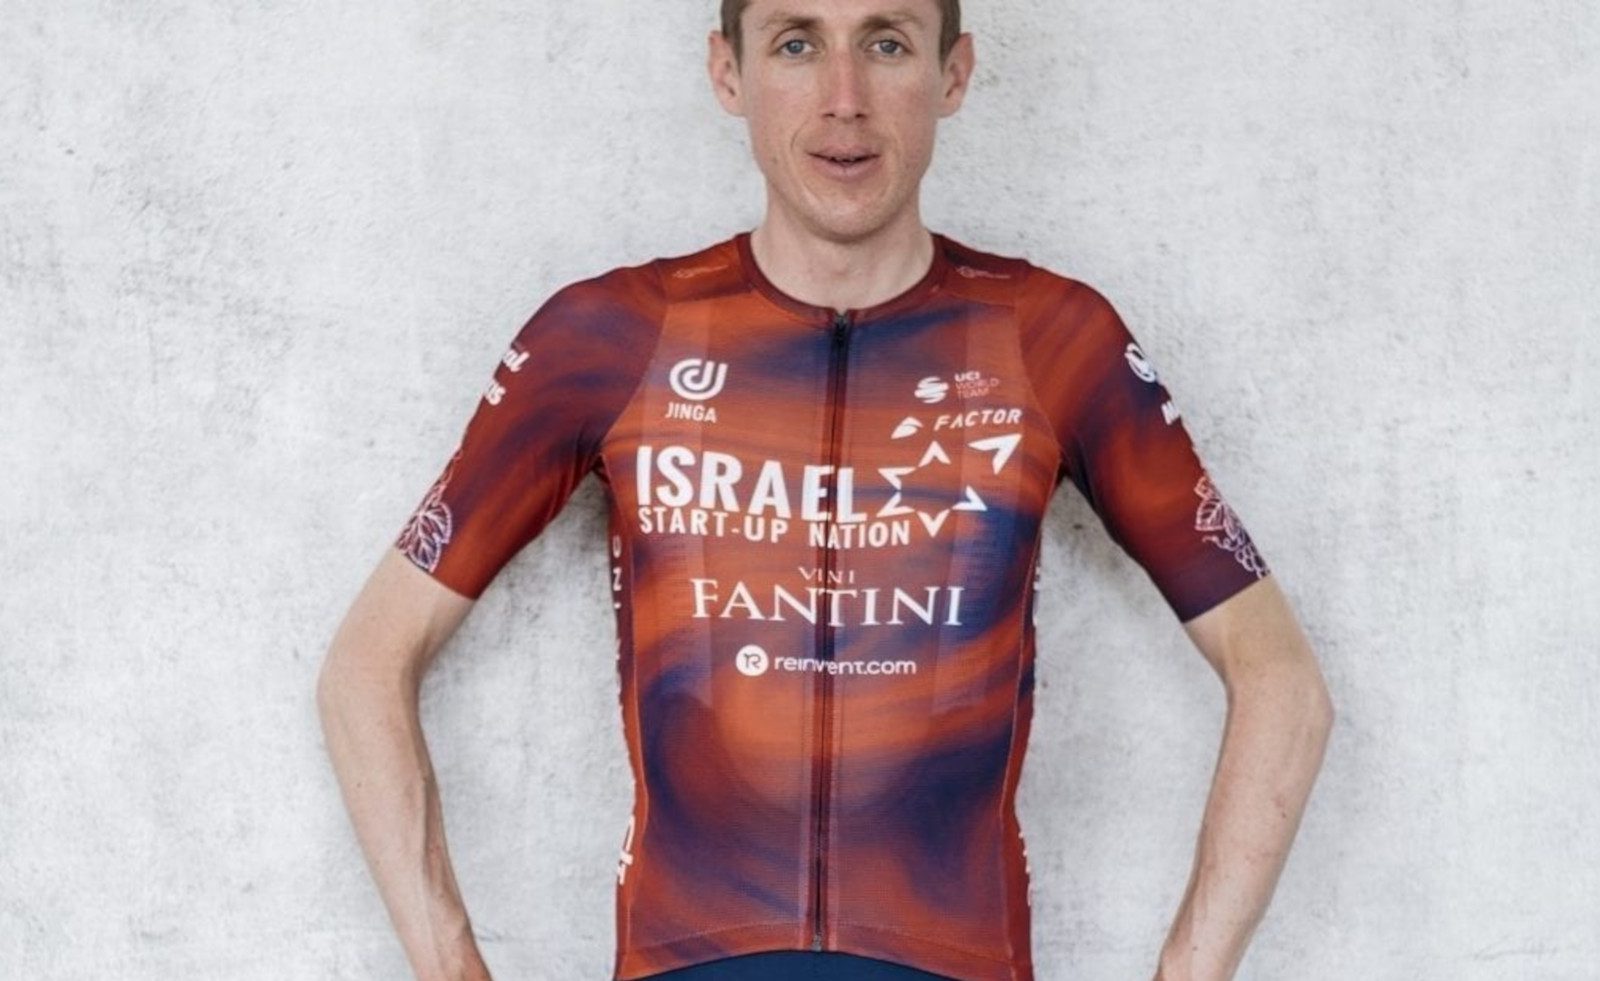 Dan Martin thinks pro cycling is super boring now and needs to change